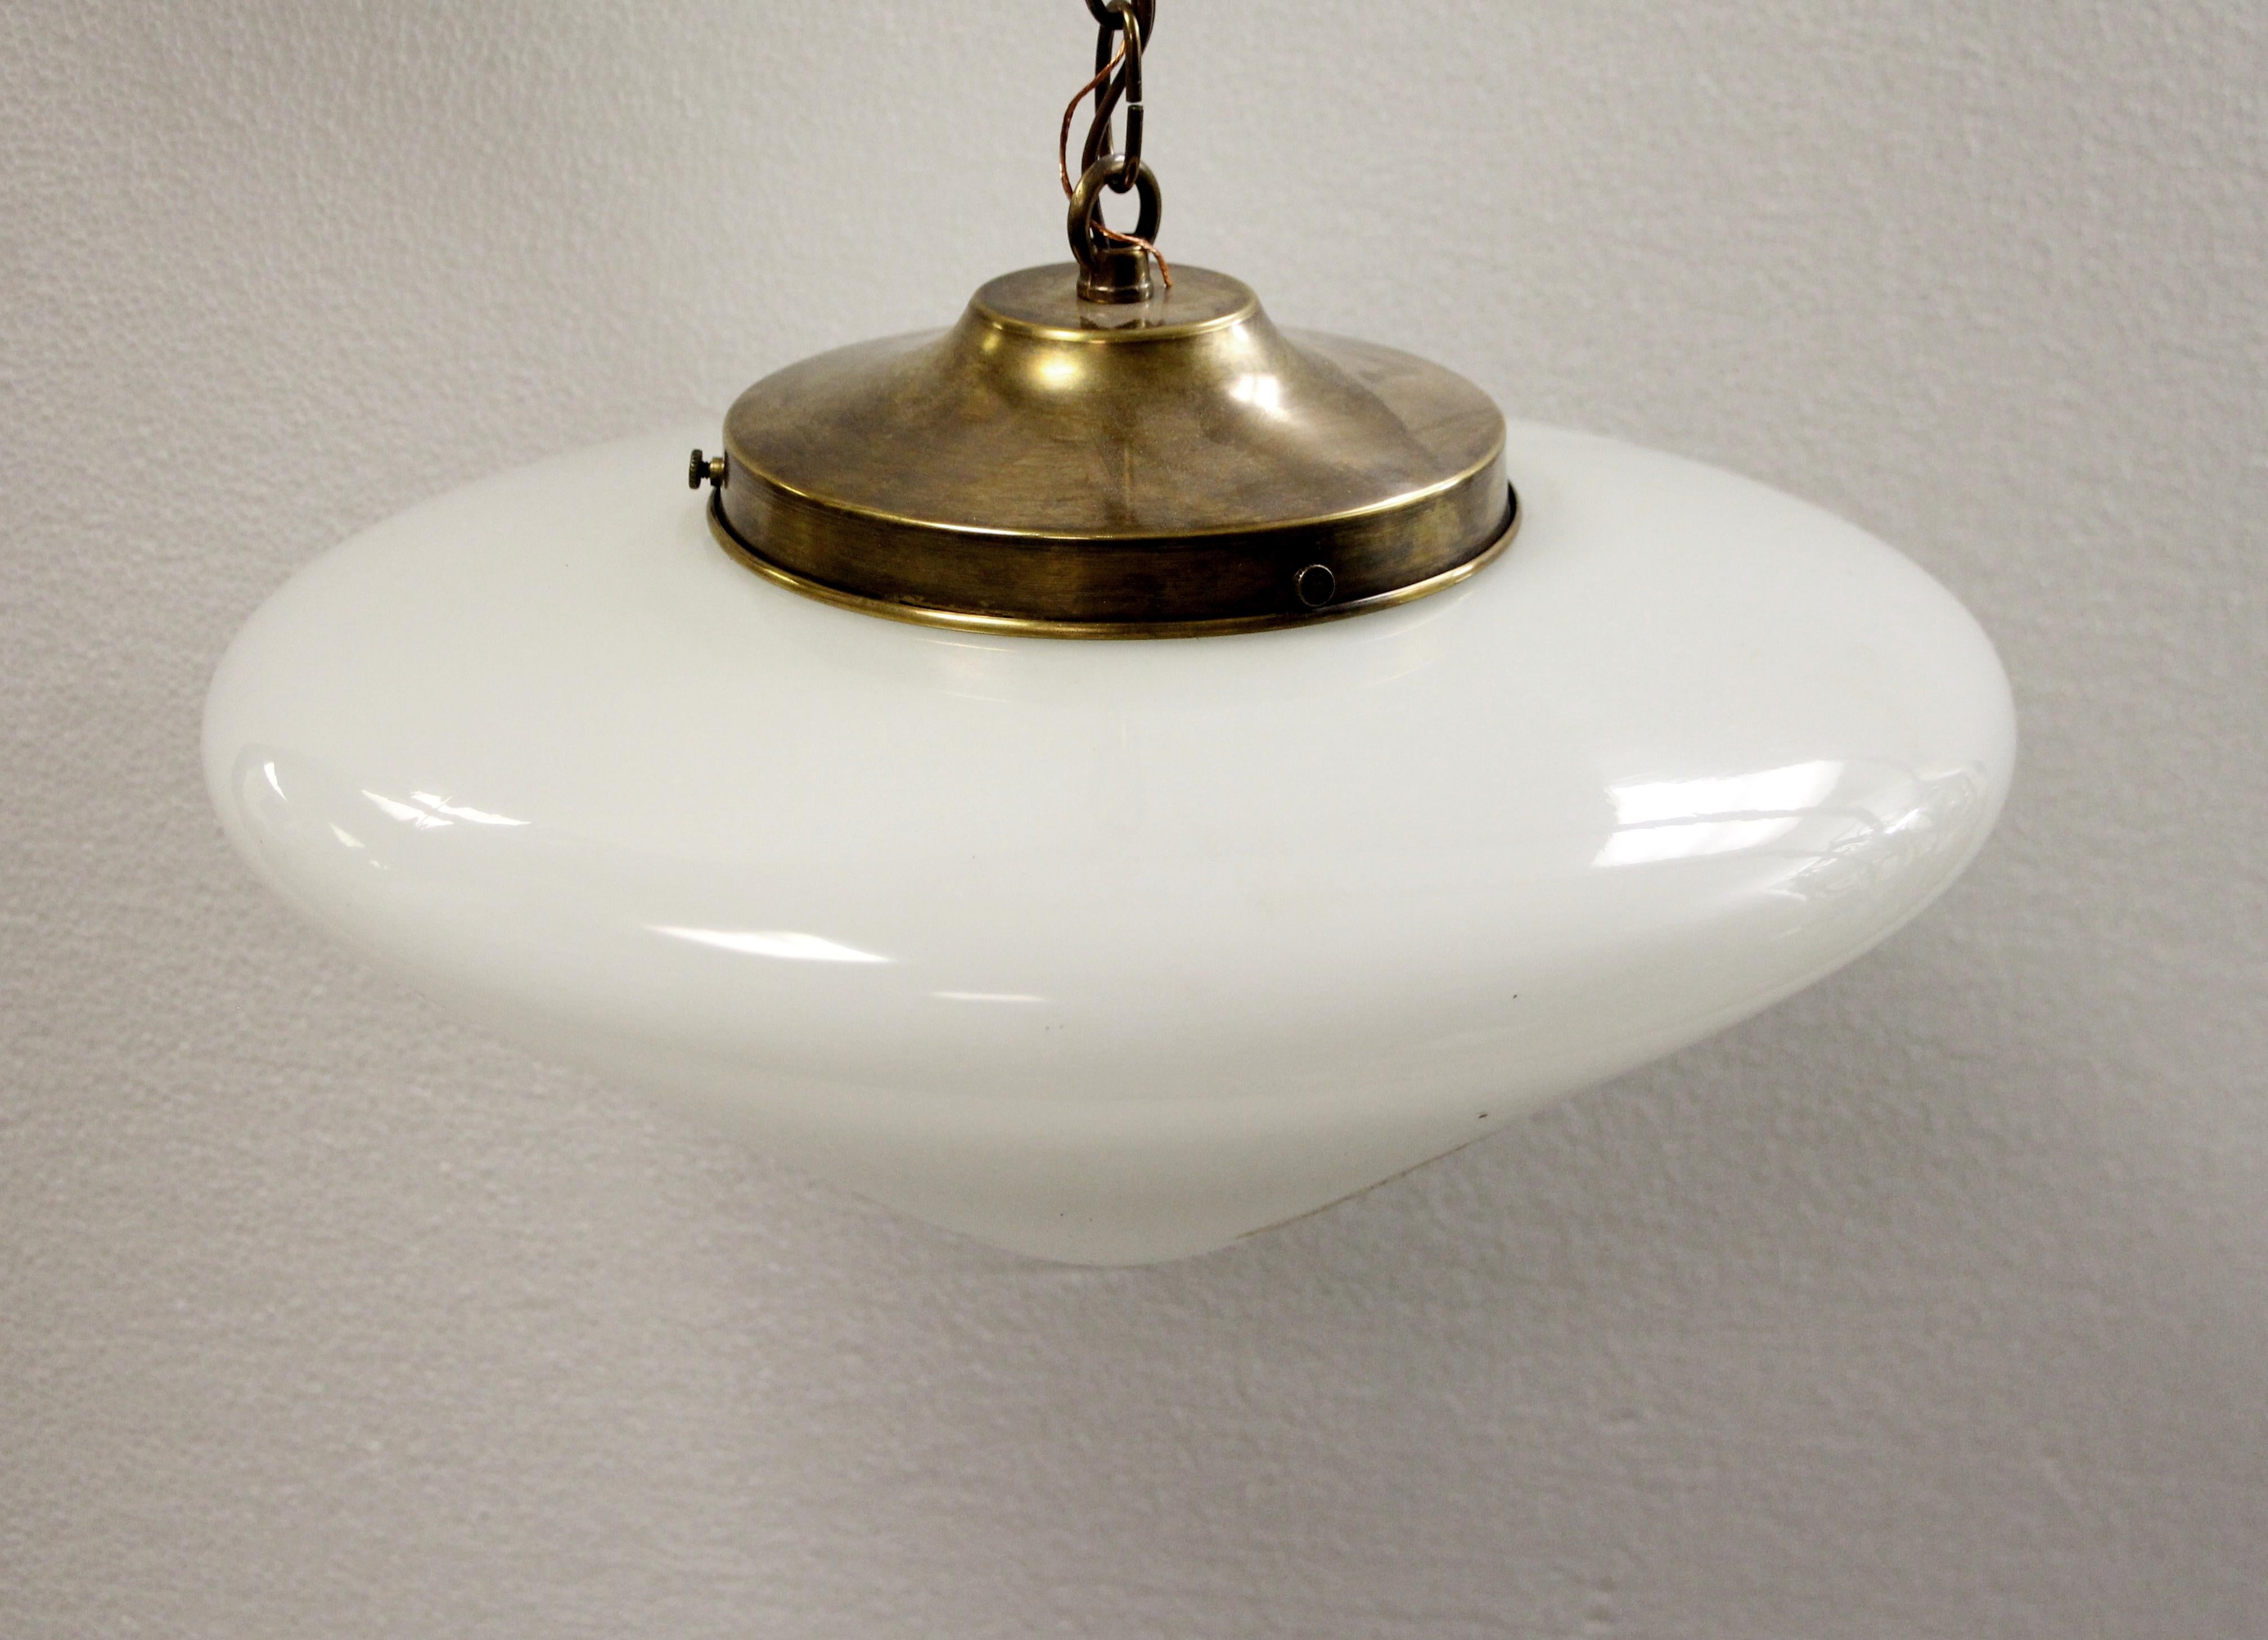 Cone shaped white milk glass globe with an antique brass reproduction fitter with chain from the 1970s. This can be seen at our 400 Gilligan St location in Scranton, PA.